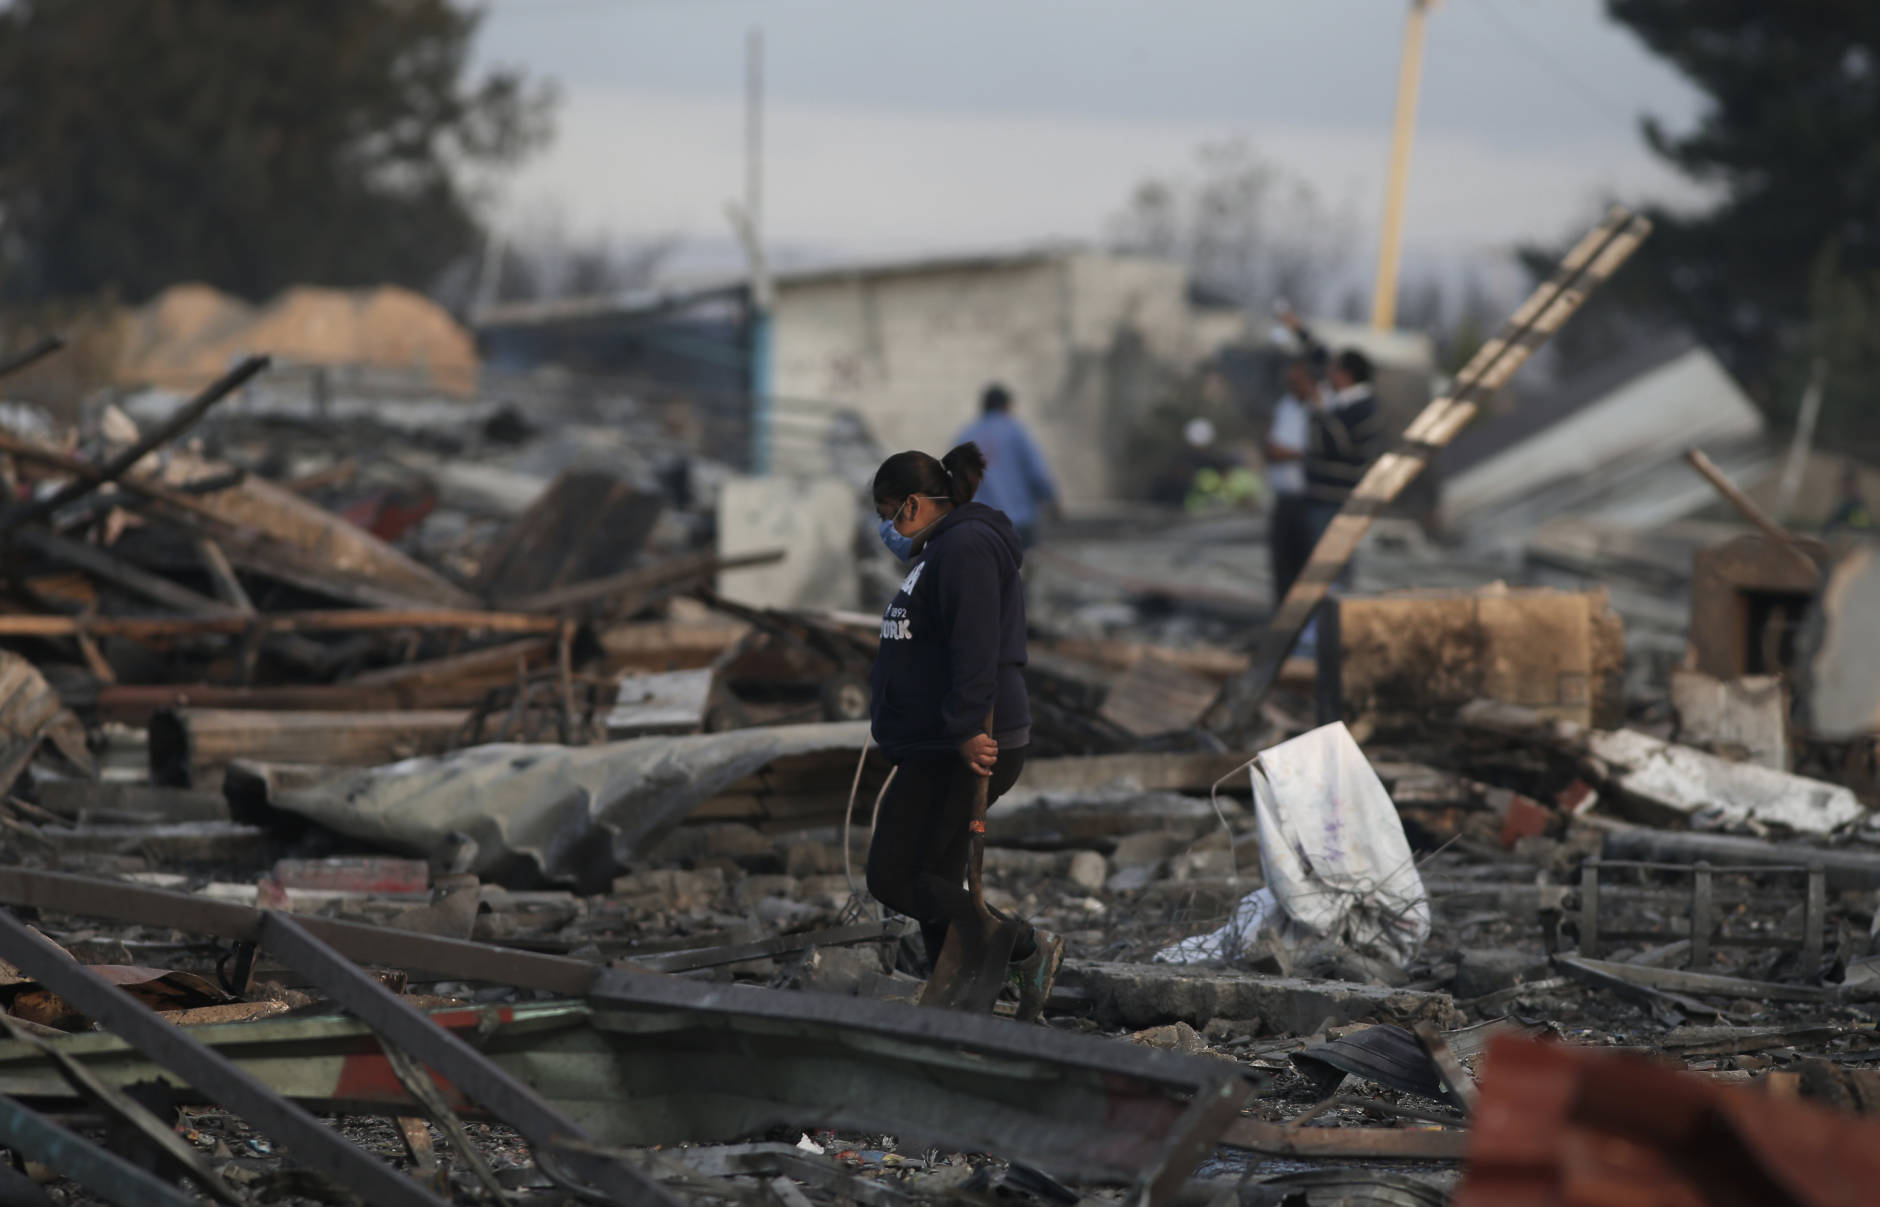 A woman carries a shovel as she walks through the scorched ground of the open-air San Pablito fireworks market, in Tultepec, outskirts of Mexico City, Mexico, Tuesday, Dec. 20, 2016.  An explosion ripped through Mexico’s best-known fireworks market on the northern outskirts of the capital Tuesday, injuring scores and killing at least 9 people , according to Mexican Federal Police. (AP Photo/Eduardo Verdugo)